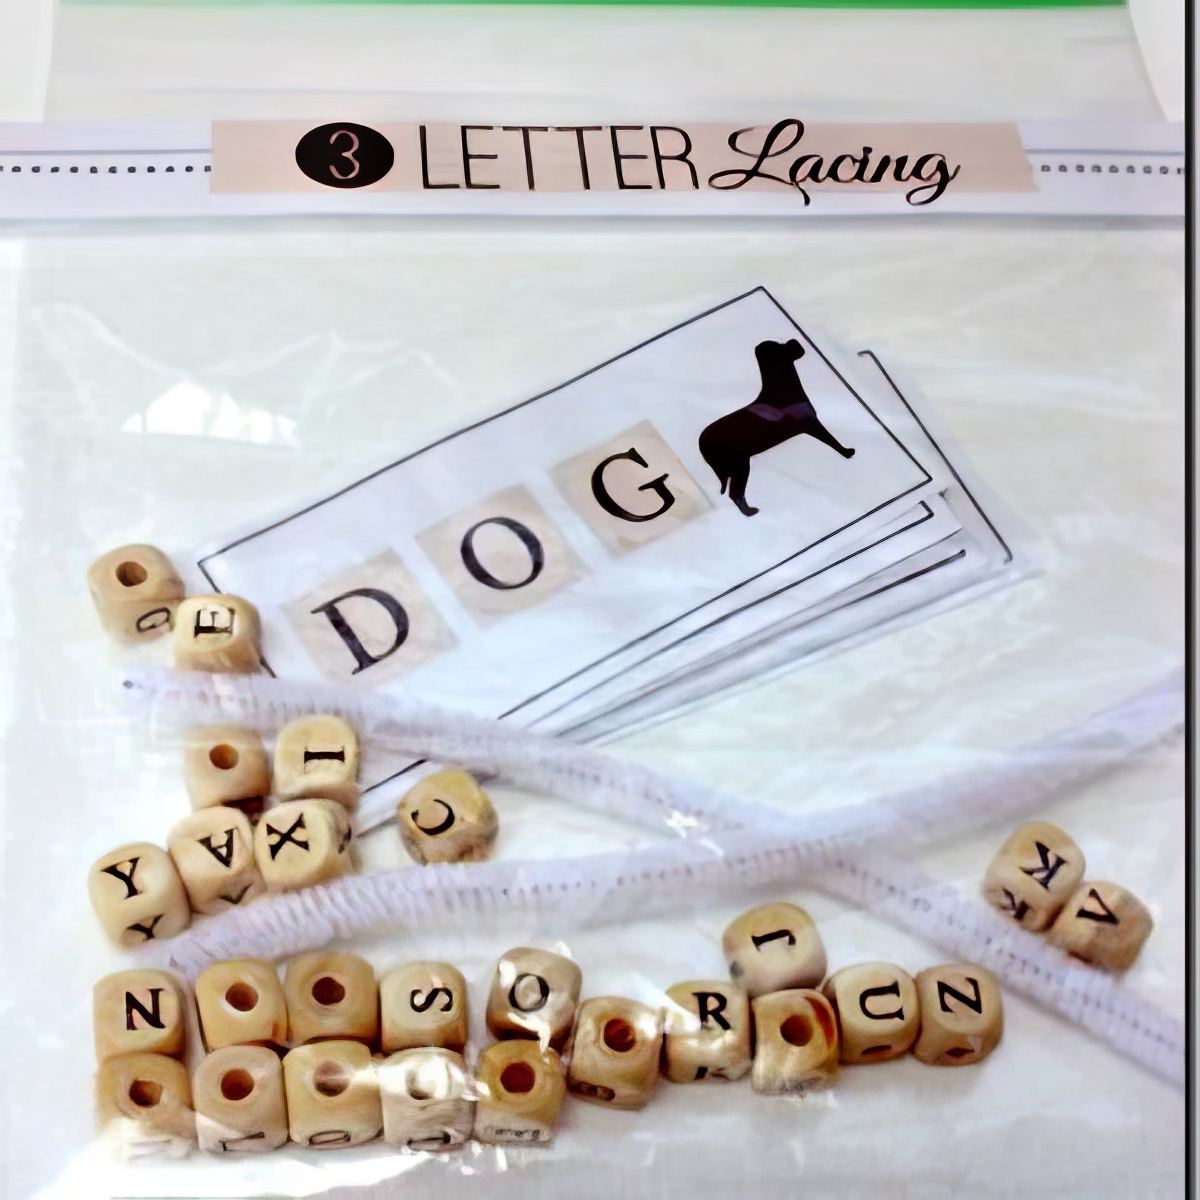 3 letter lacing using pipecleaners and letter beads for sight words